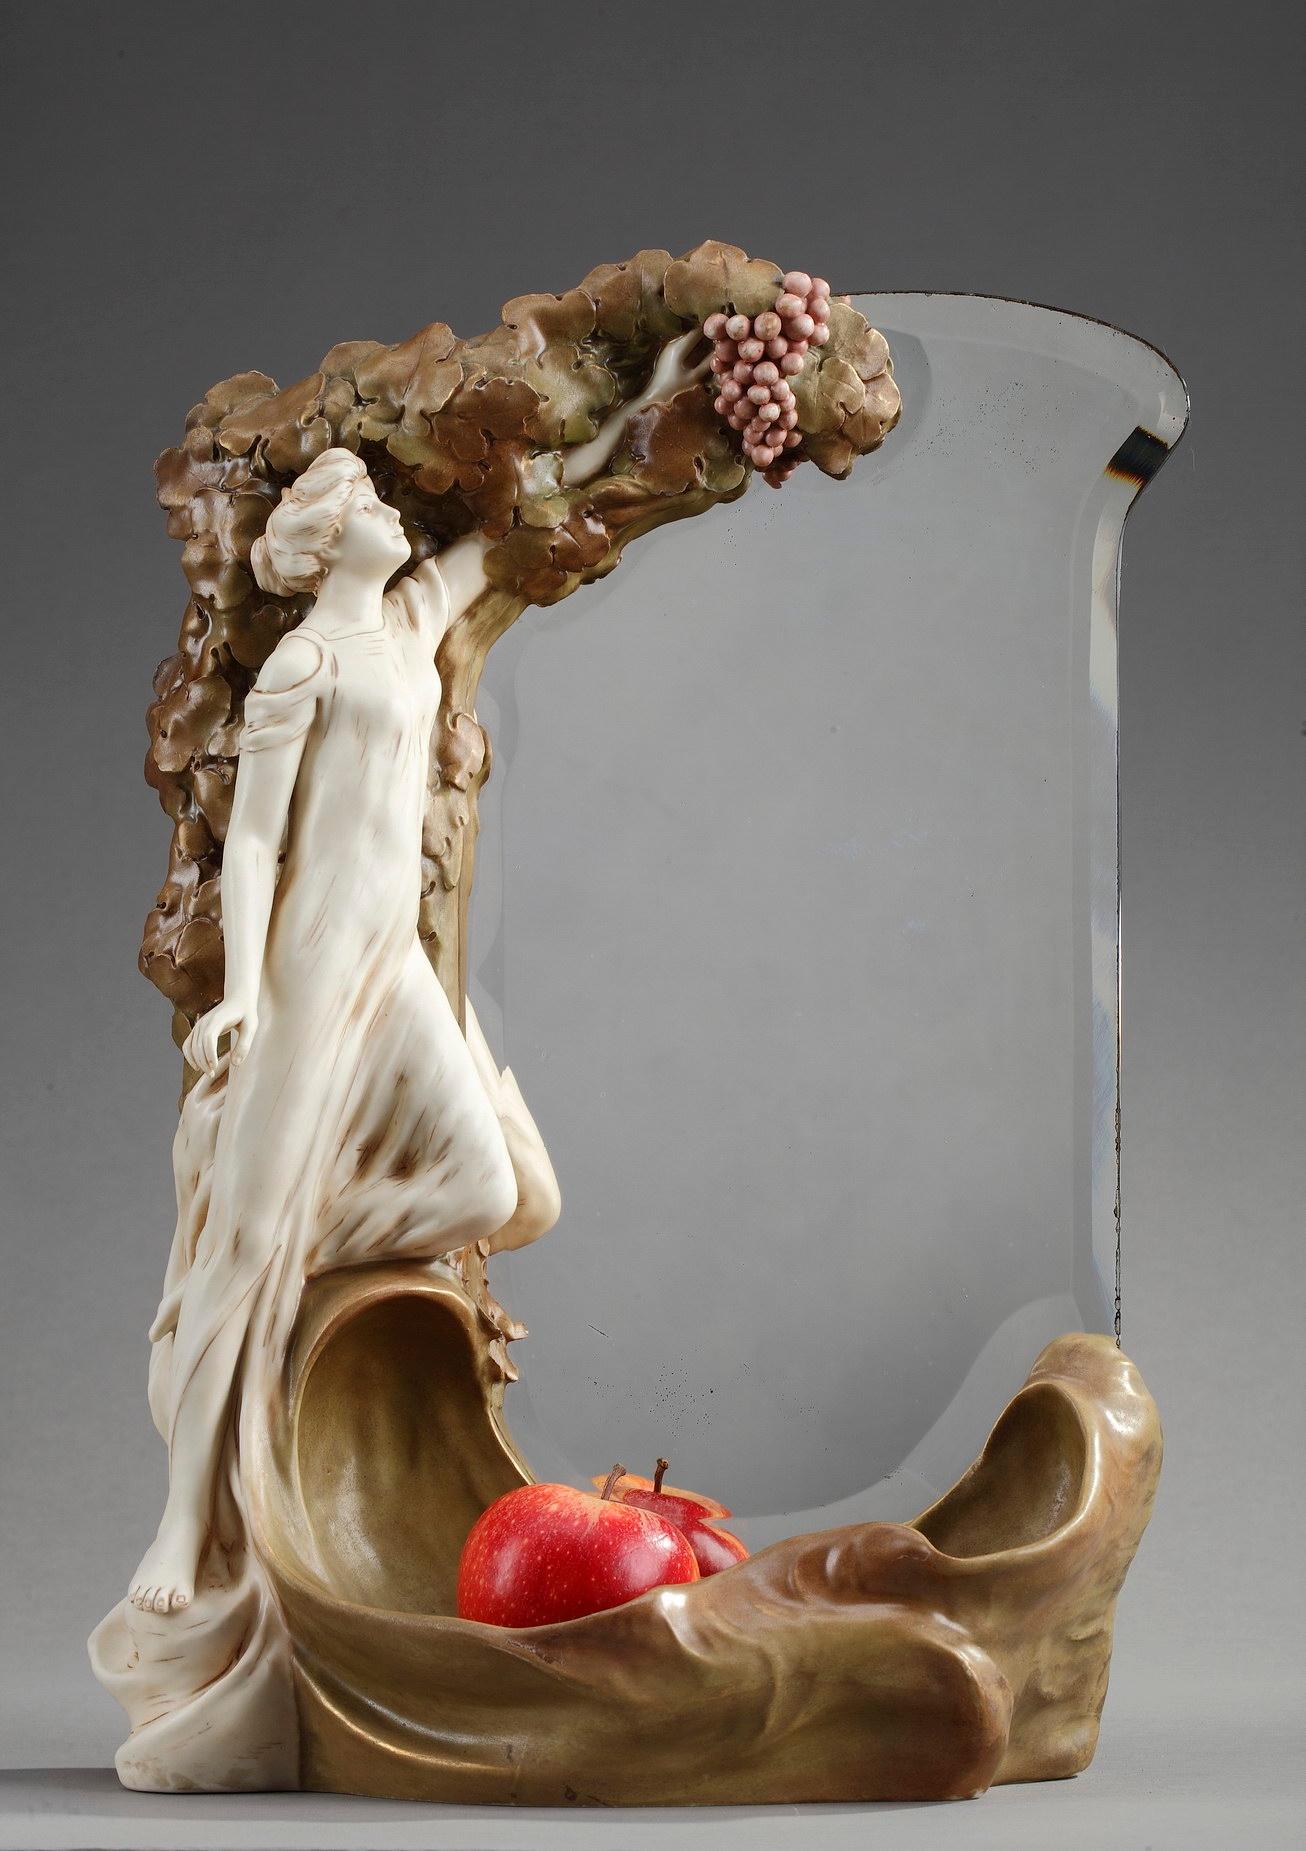 This original Art Nouveau mirror was crafted of polychrome porcelain. The beleved, rectangular glass is decorated with a young woman picking a grape. The lower part of the mirror forms a receptacle. Marked underneath: Royal Dux Bohemia and numbered